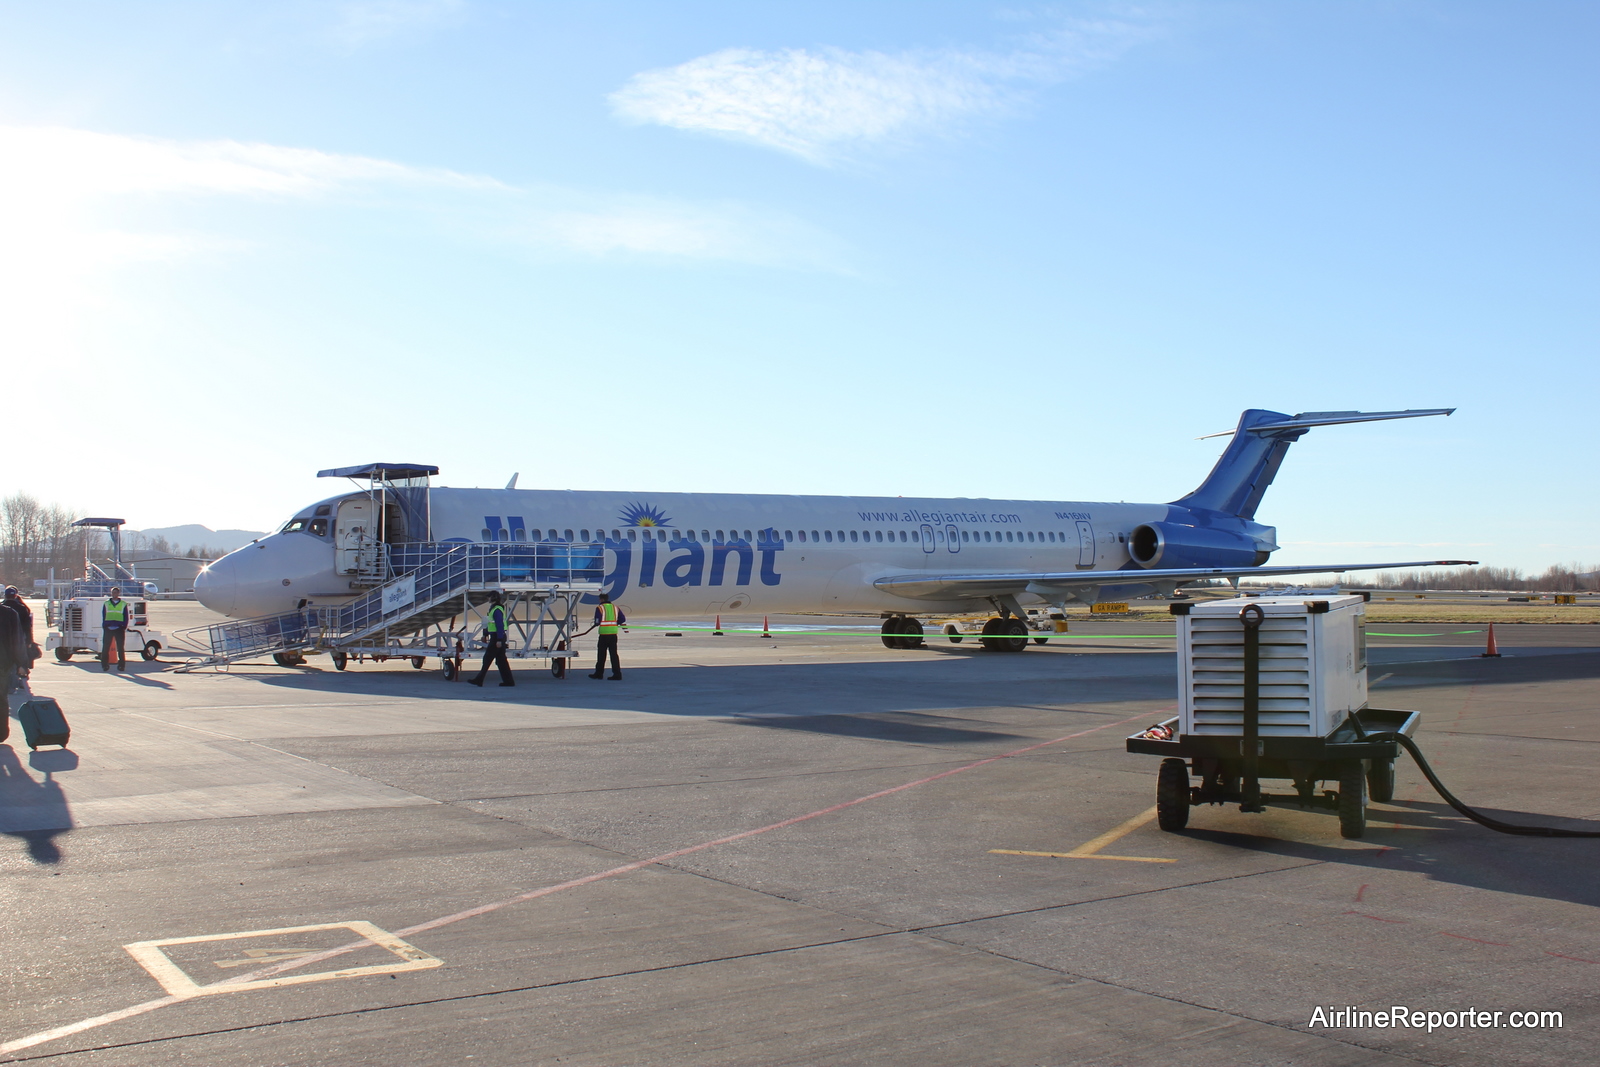 What are some one-way flight destinations for Allegiant Air flights from South Bend?